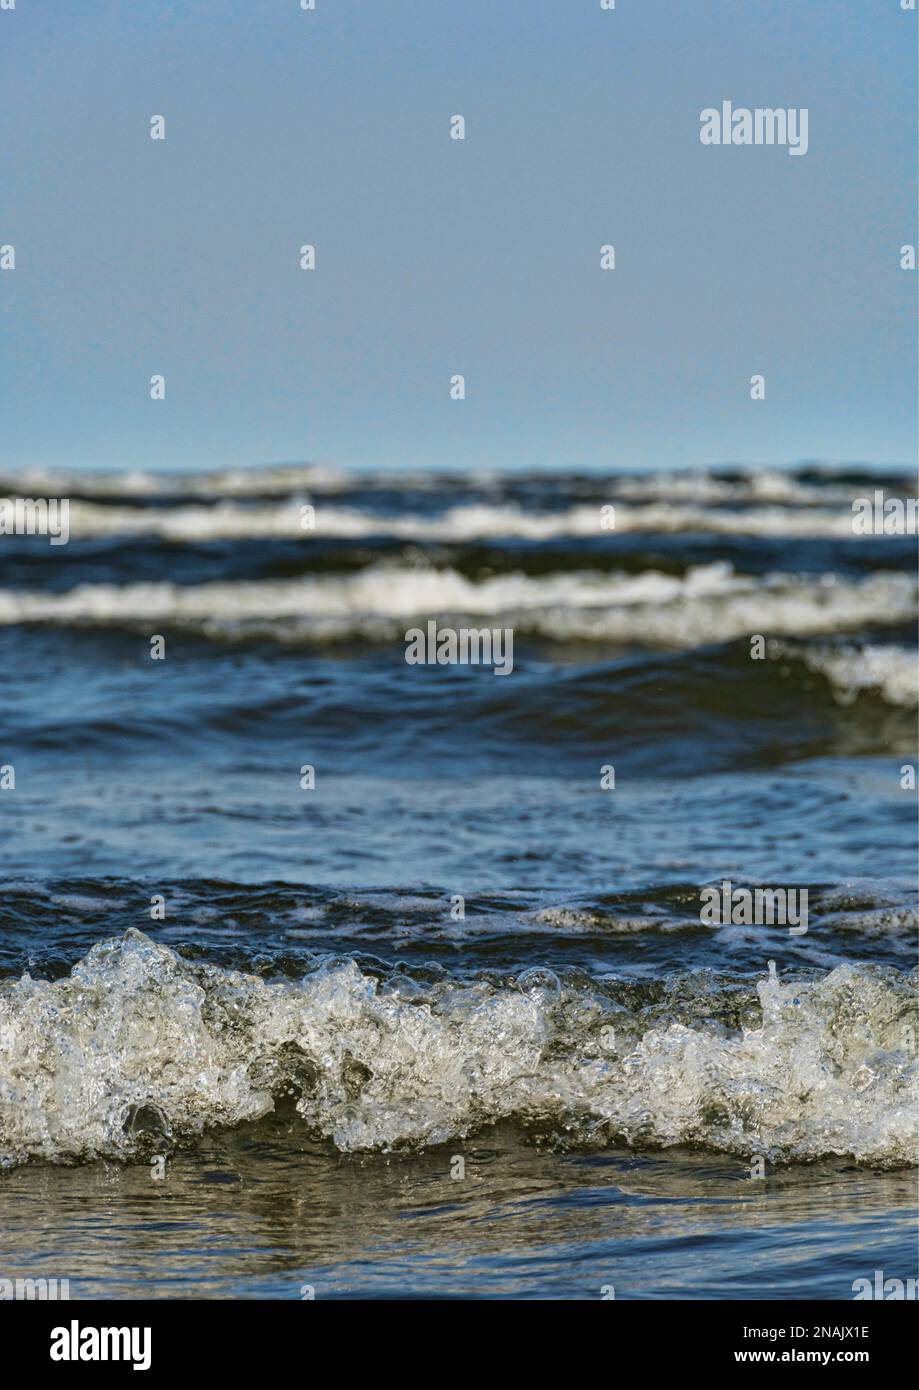 Sea waves with a cloudless sky in the background, vertical format Stock Photo